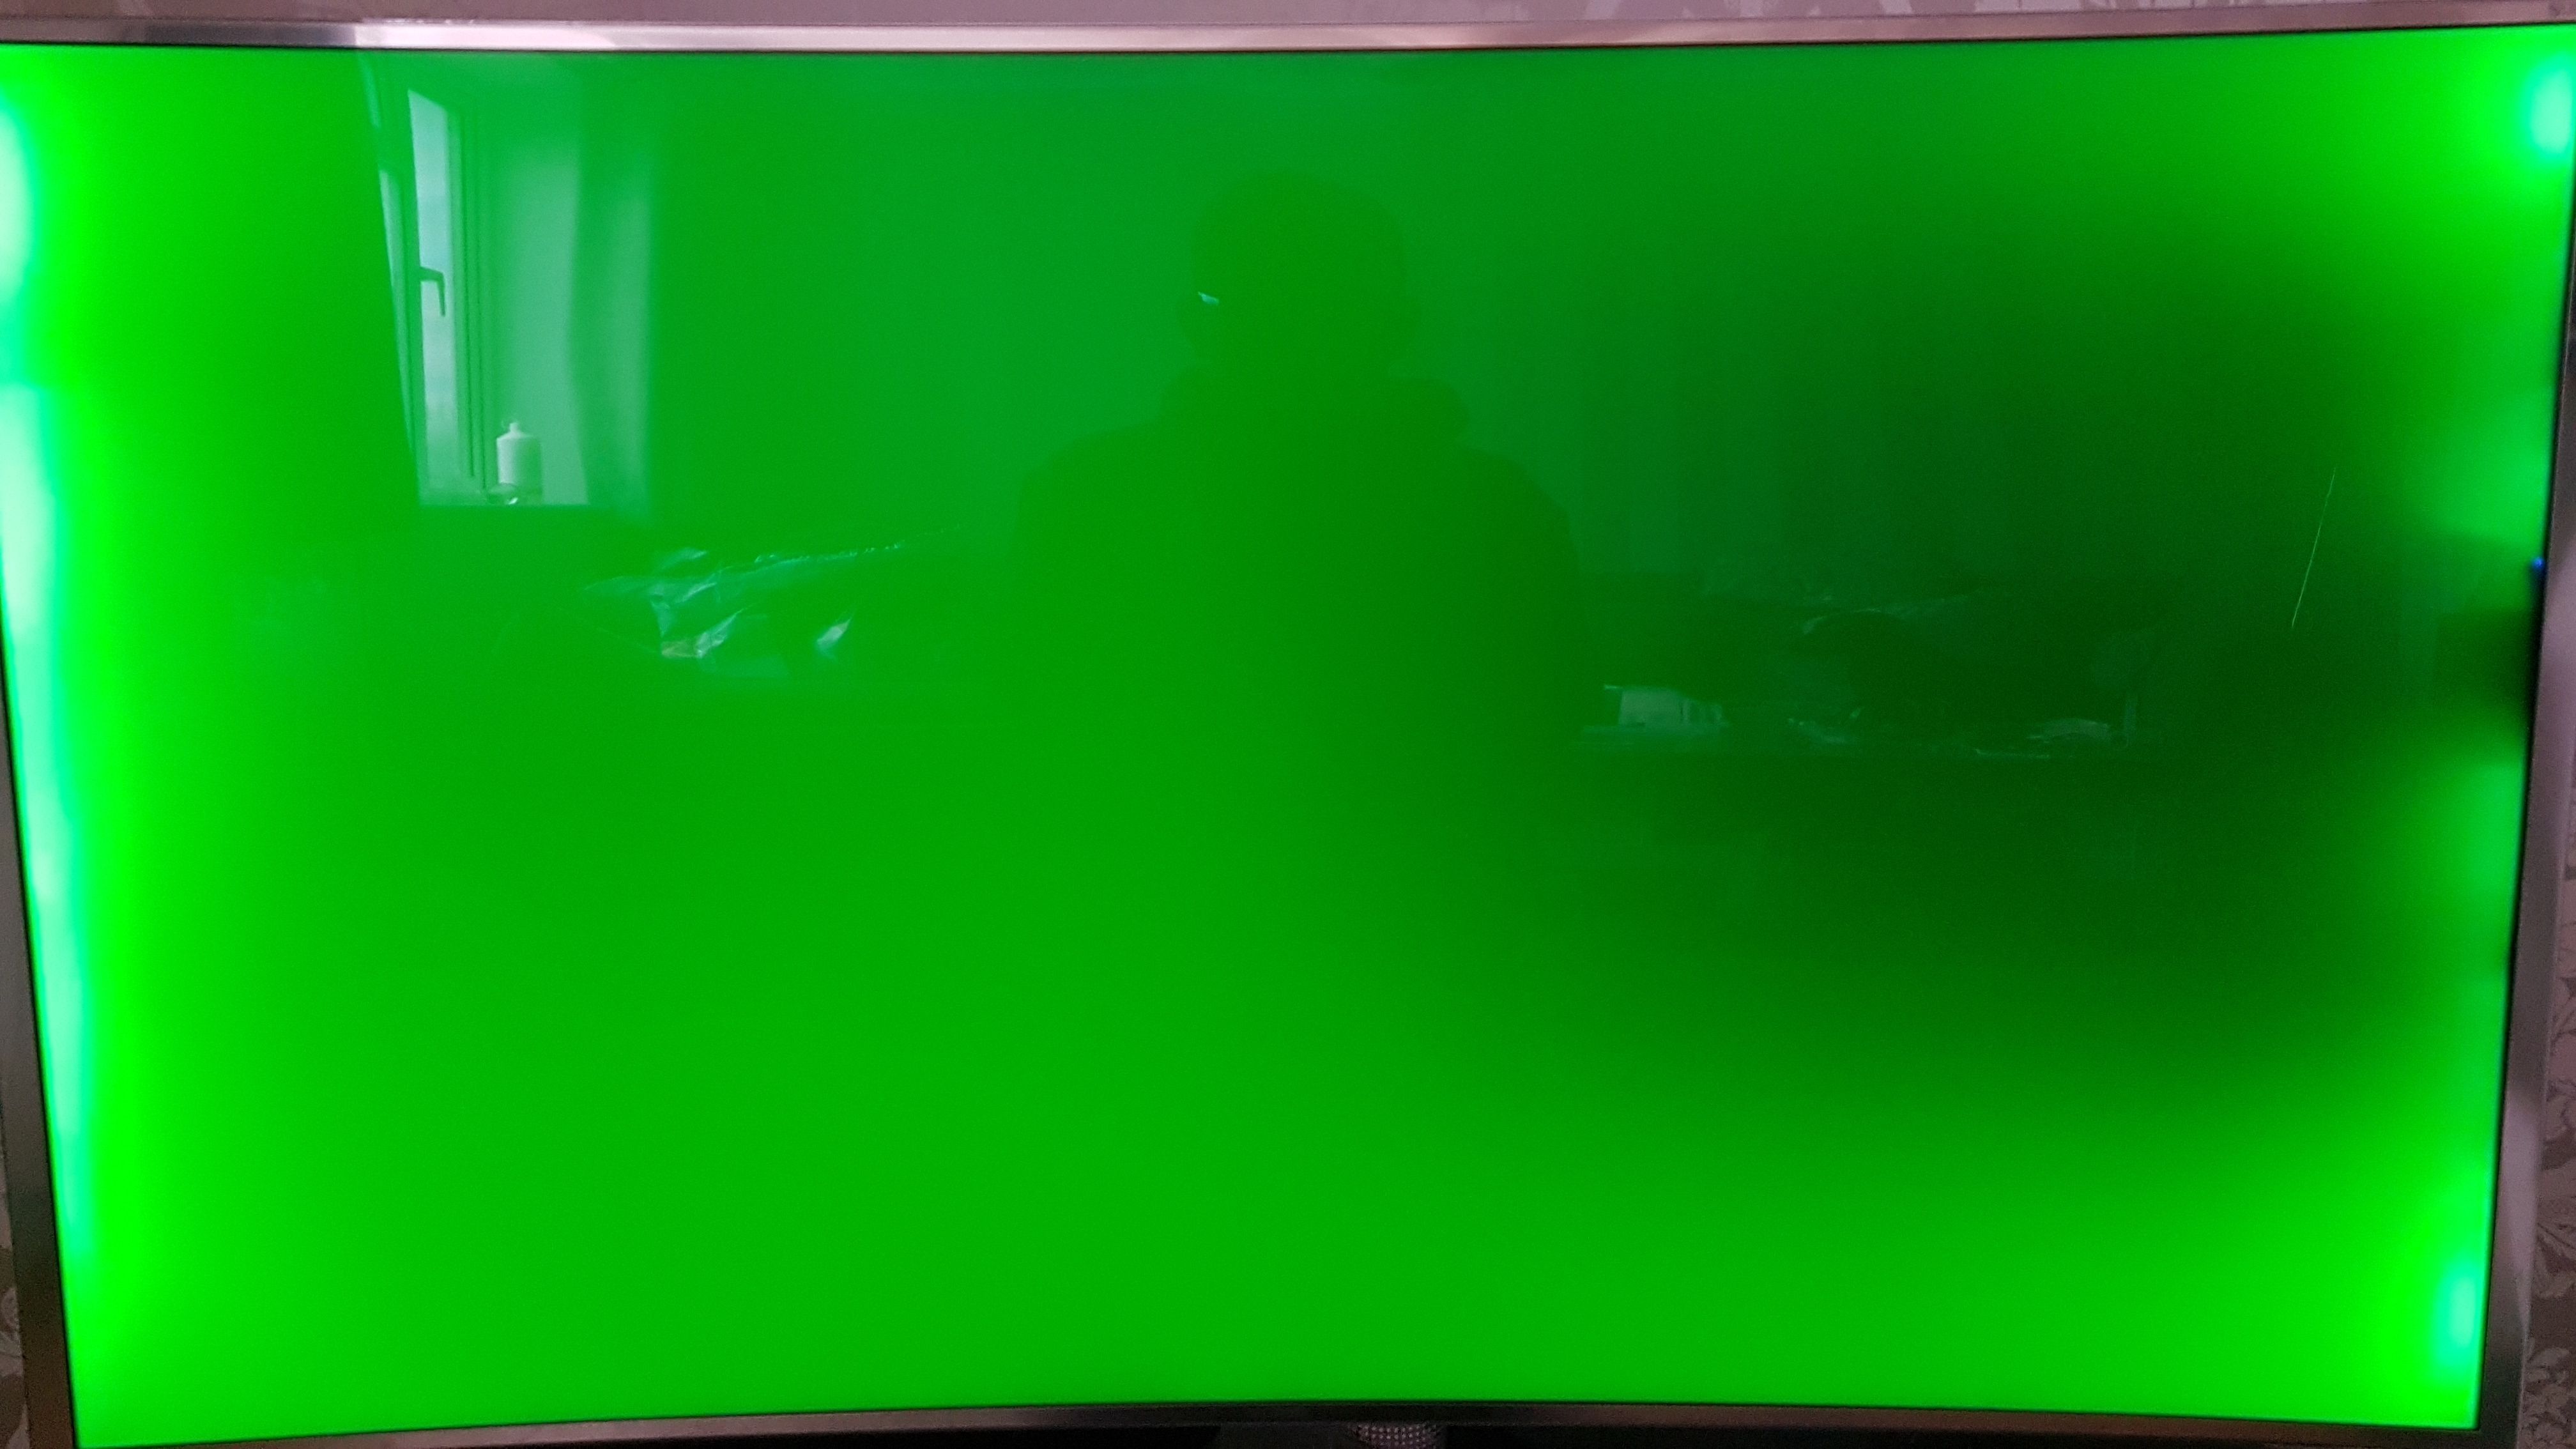 White spots and light bleed on Samsung